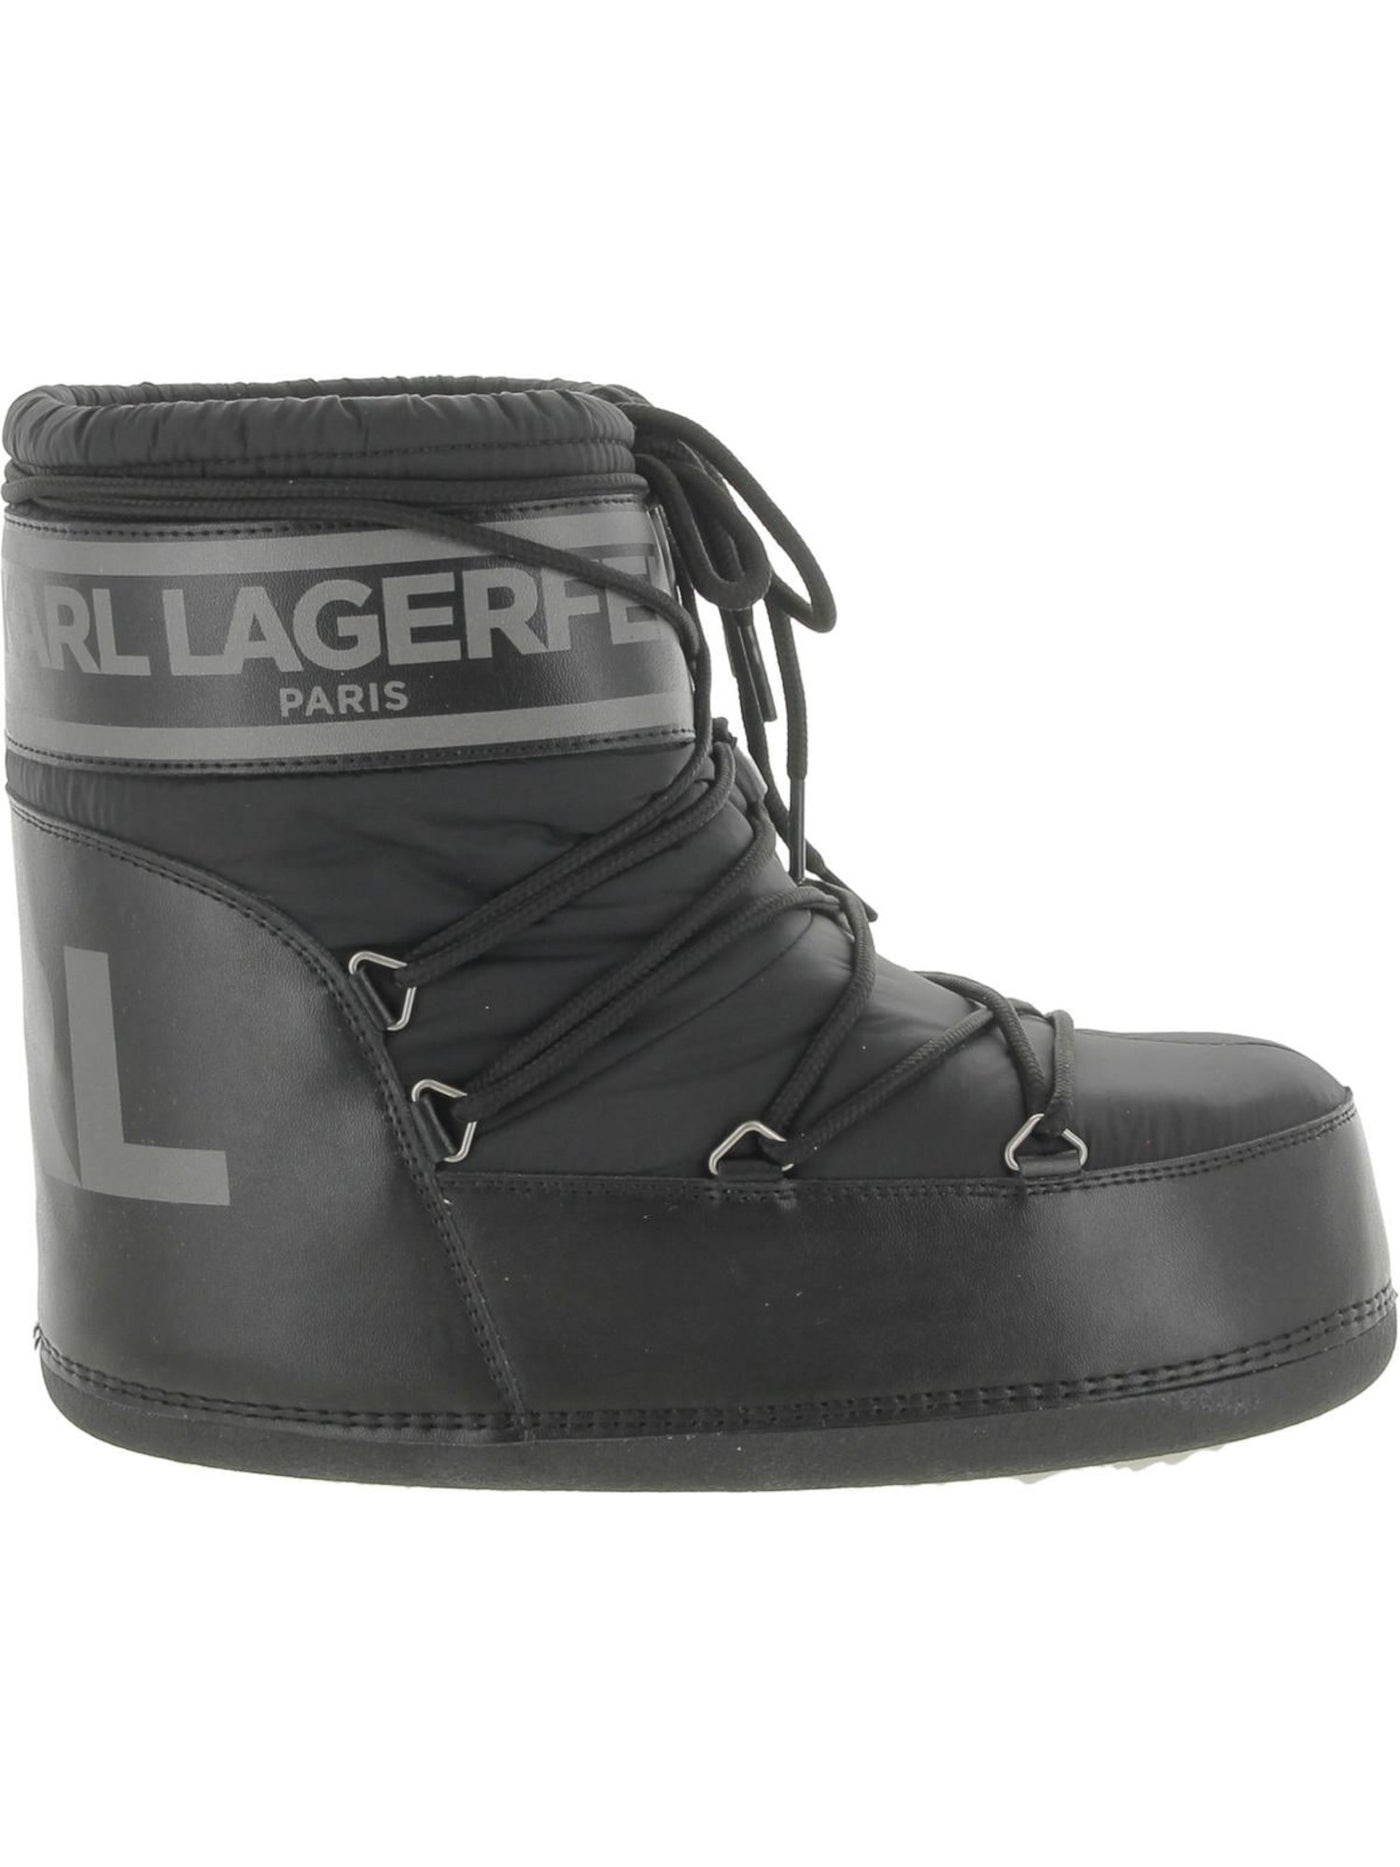 KARL LAGERFELD Womens Black Logo Cushioned Pavan Round Toe Lace-Up Winter 5